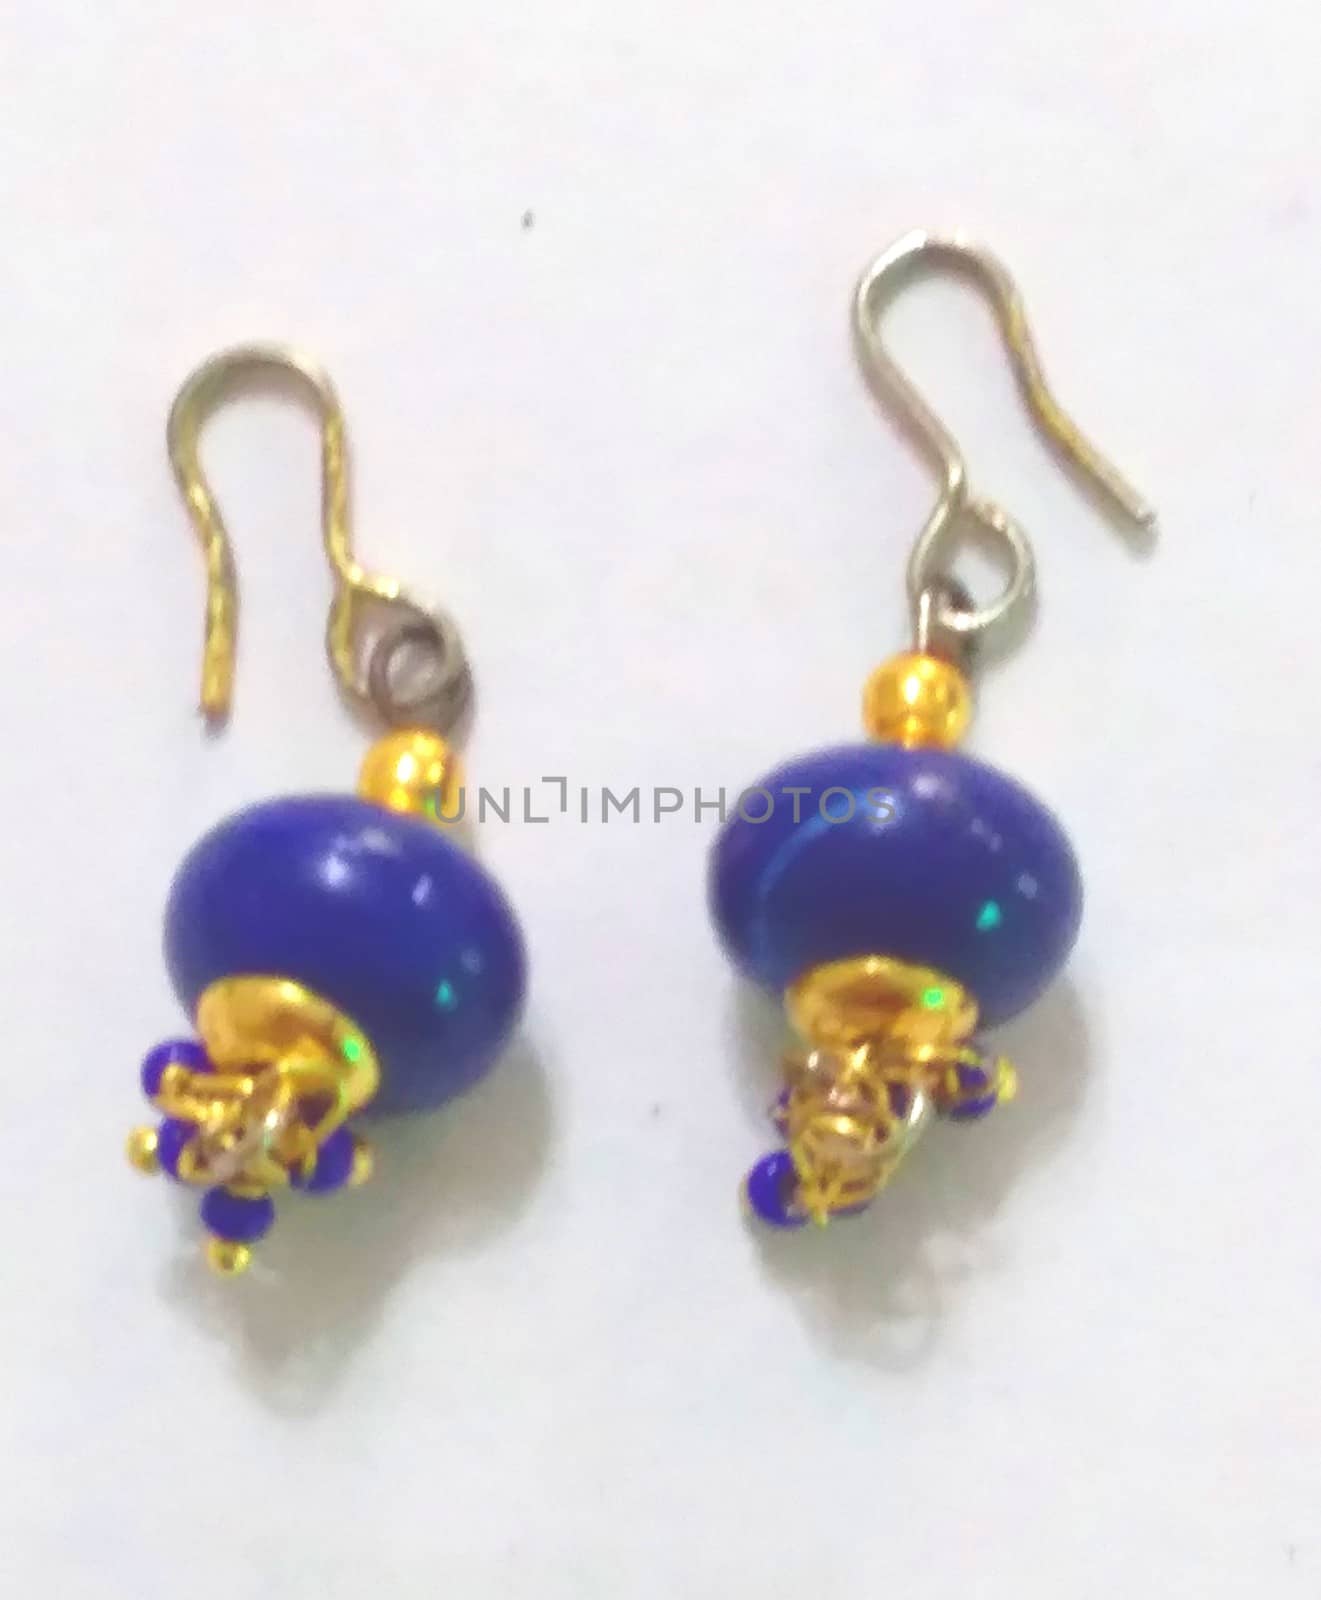 lovely and fashionable blue earrings